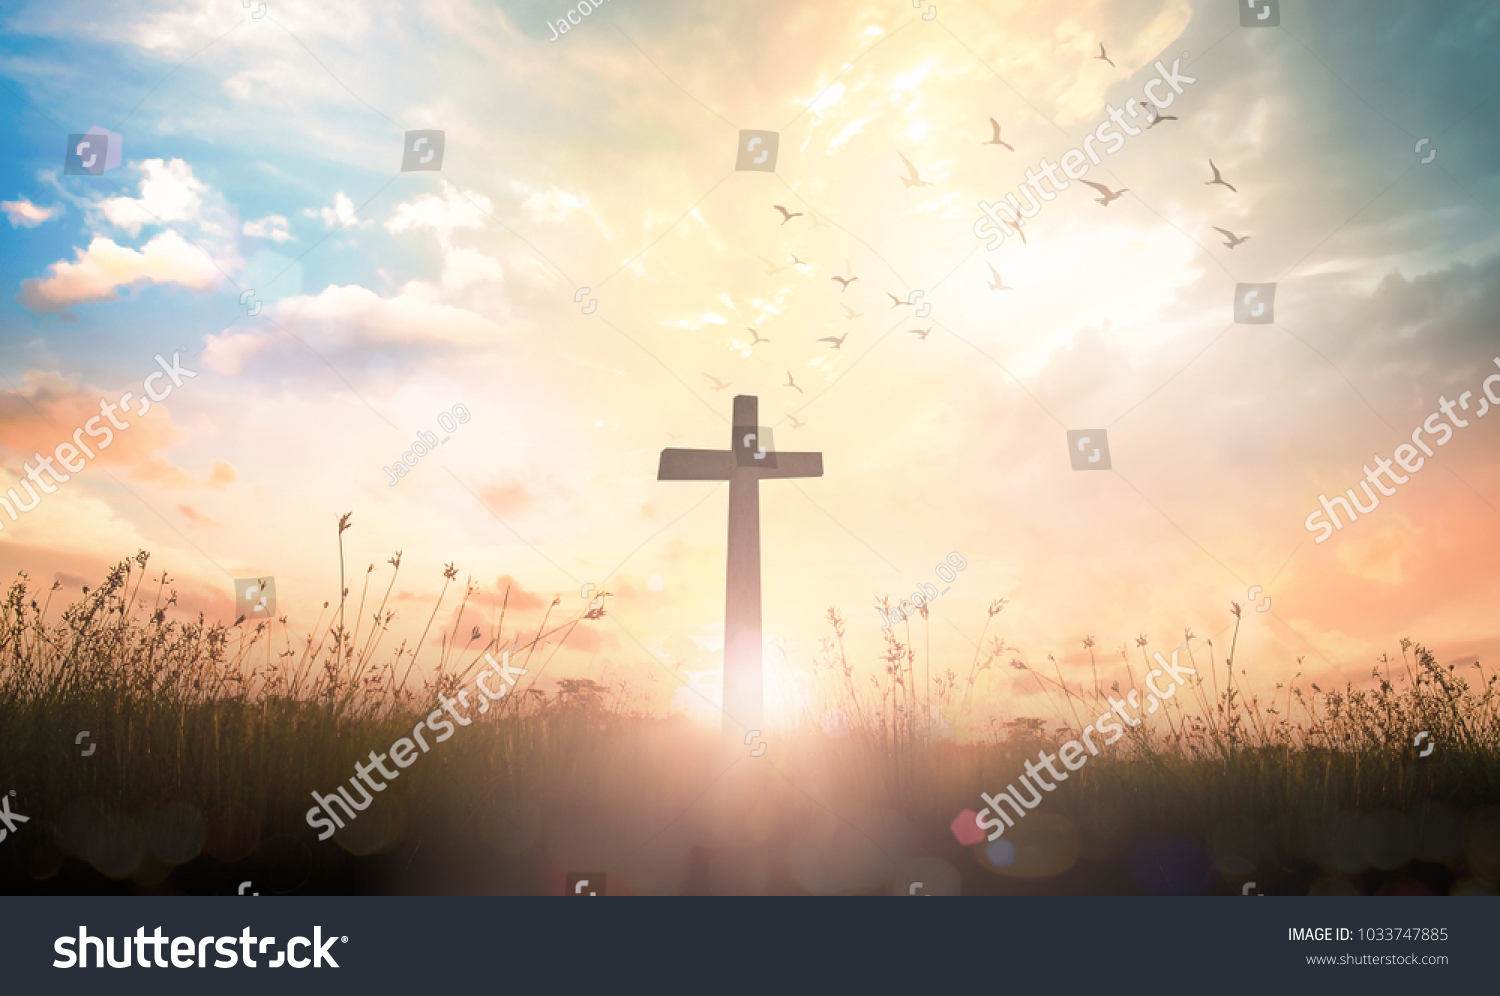 Easter Religious concept: Silhouette cross and birds flying on meadow autumn sunrise #1033747885